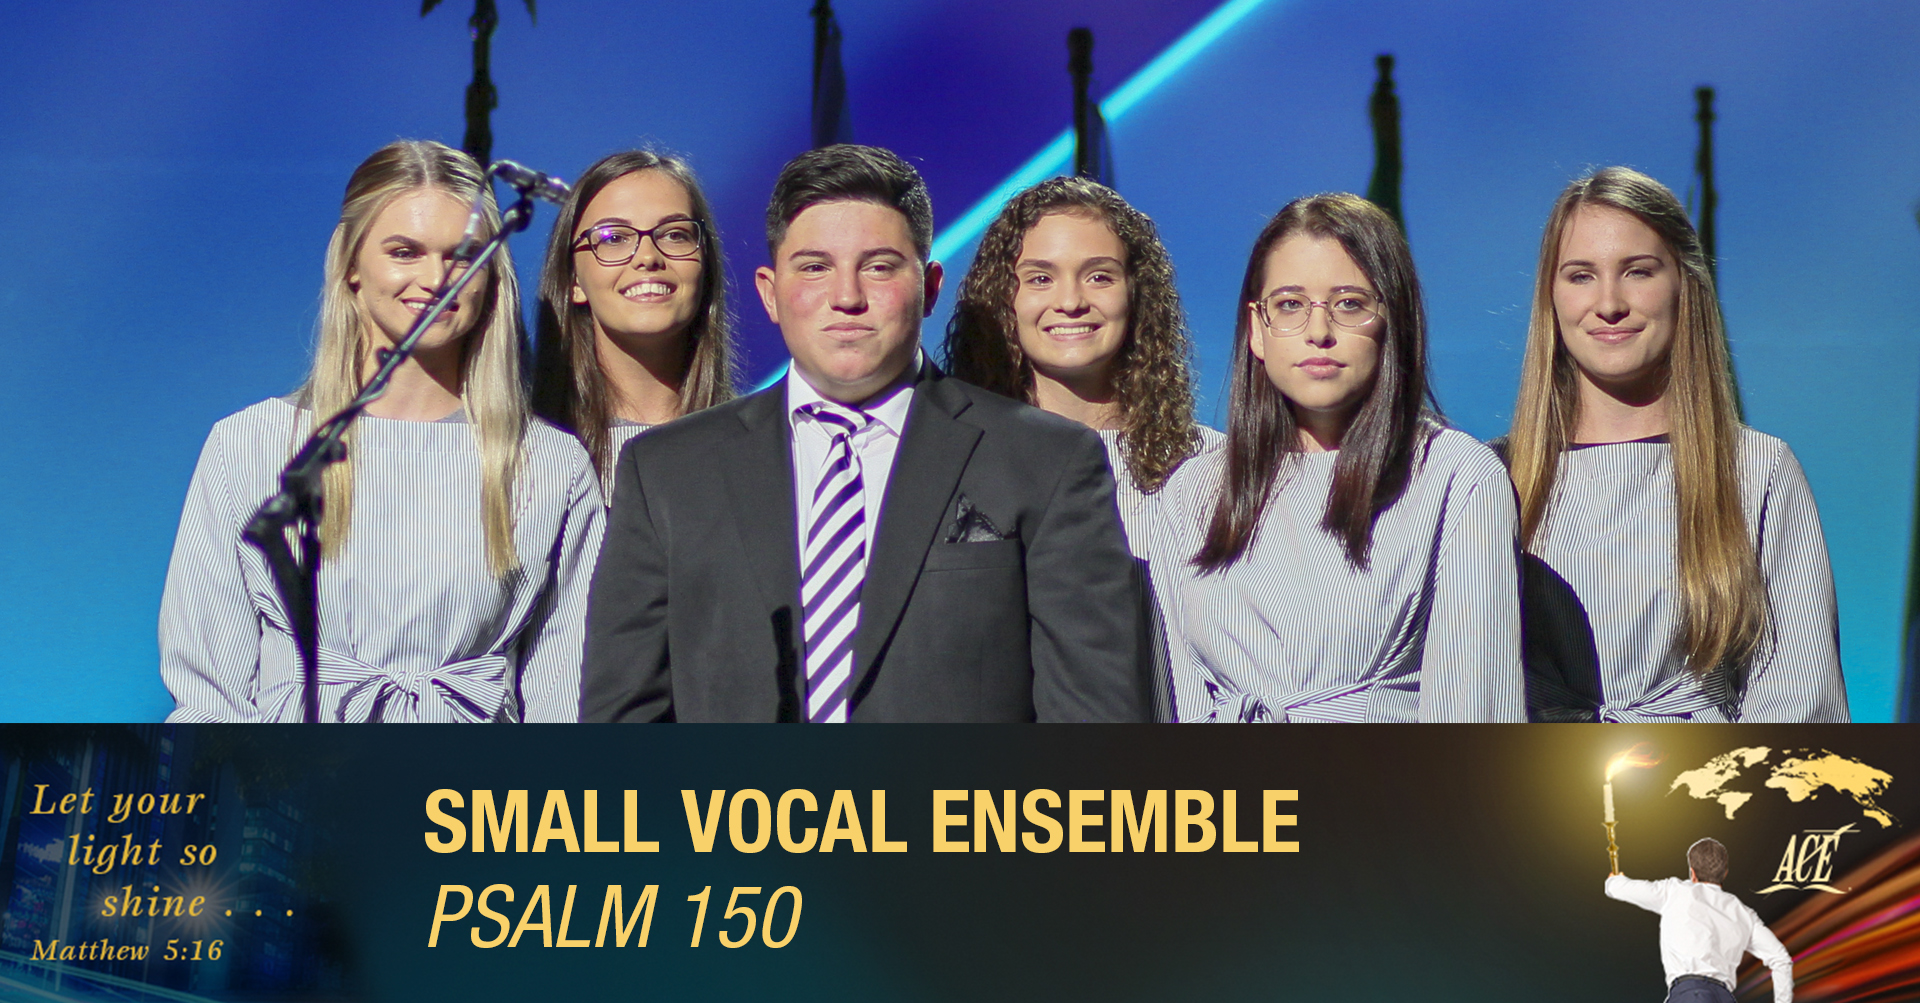 Small Vocal Ensemble, "Psalm 150" - ISC 2019